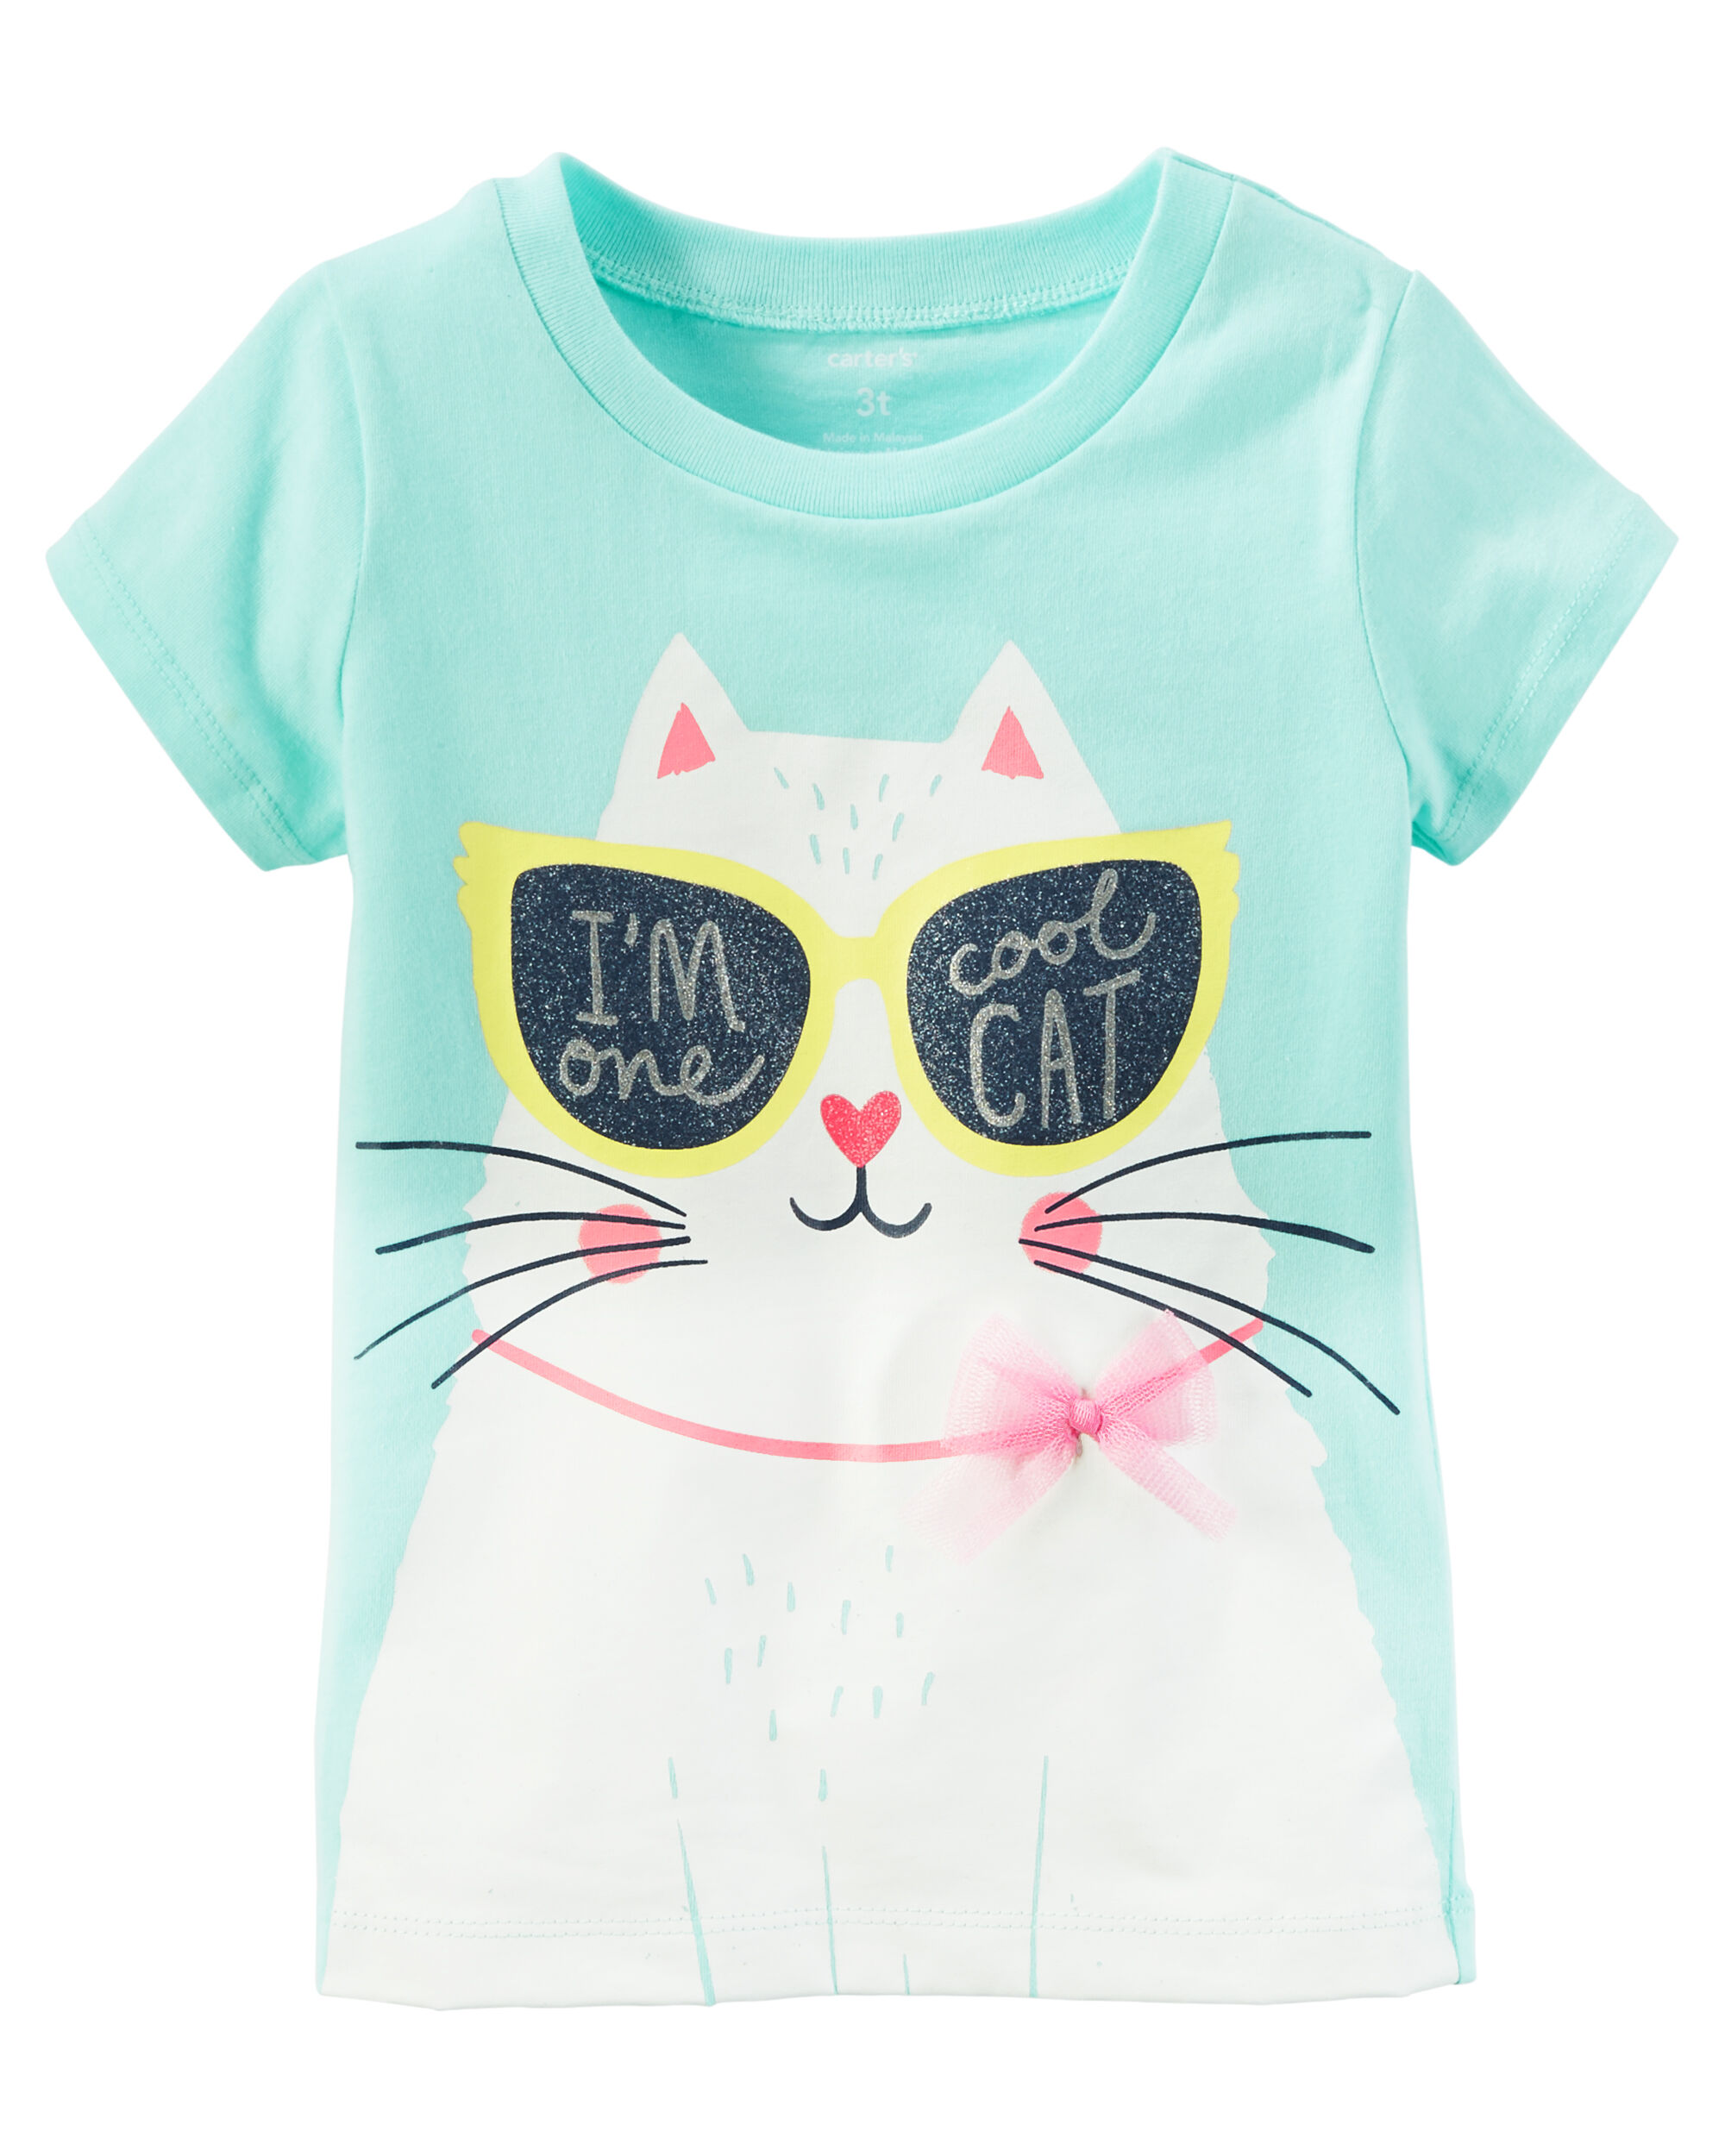 One Cool Cat Graphic Tee | Carters.com